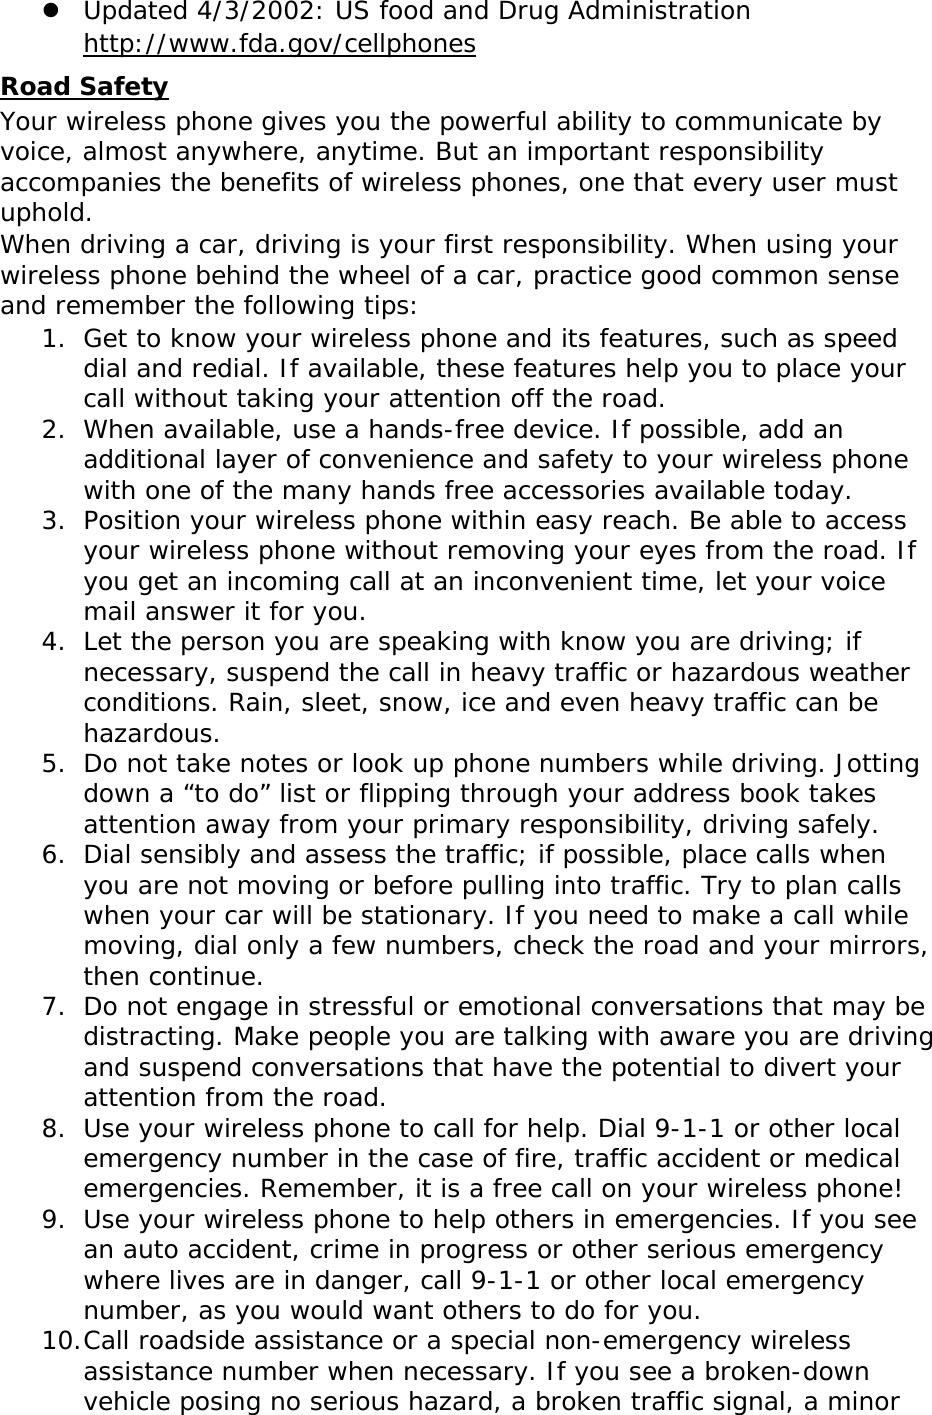  Updated 4/3/2002: US food and Drug Administration  http://www.fda.gov/cellphones Road Safety Your wireless phone gives you the powerful ability to communicate by voice, almost anywhere, anytime. But an important responsibility accompanies the benefits of wireless phones, one that every user must uphold. When driving a car, driving is your first responsibility. When using your wireless phone behind the wheel of a car, practice good common sense and remember the following tips: 1. Get to know your wireless phone and its features, such as speed dial and redial. If available, these features help you to place your call without taking your attention off the road. 2. When available, use a hands-free device. If possible, add an additional layer of convenience and safety to your wireless phone with one of the many hands free accessories available today. 3. Position your wireless phone within easy reach. Be able to access your wireless phone without removing your eyes from the road. If you get an incoming call at an inconvenient time, let your voice mail answer it for you. 4. Let the person you are speaking with know you are driving; if necessary, suspend the call in heavy traffic or hazardous weather conditions. Rain, sleet, snow, ice and even heavy traffic can be hazardous. 5. Do not take notes or look up phone numbers while driving. Jotting down a “to do” list or flipping through your address book takes attention away from your primary responsibility, driving safely. 6. Dial sensibly and assess the traffic; if possible, place calls when you are not moving or before pulling into traffic. Try to plan calls when your car will be stationary. If you need to make a call while moving, dial only a few numbers, check the road and your mirrors, then continue. 7. Do not engage in stressful or emotional conversations that may be distracting. Make people you are talking with aware you are driving and suspend conversations that have the potential to divert your attention from the road. 8. Use your wireless phone to call for help. Dial 9-1-1 or other local emergency number in the case of fire, traffic accident or medical emergencies. Remember, it is a free call on your wireless phone! 9. Use your wireless phone to help others in emergencies. If you see an auto accident, crime in progress or other serious emergency where lives are in danger, call 9-1-1 or other local emergency number, as you would want others to do for you. 10. Call roadside assistance or a special non-emergency wireless assistance number when necessary. If you see a broken-down vehicle posing no serious hazard, a broken traffic signal, a minor 